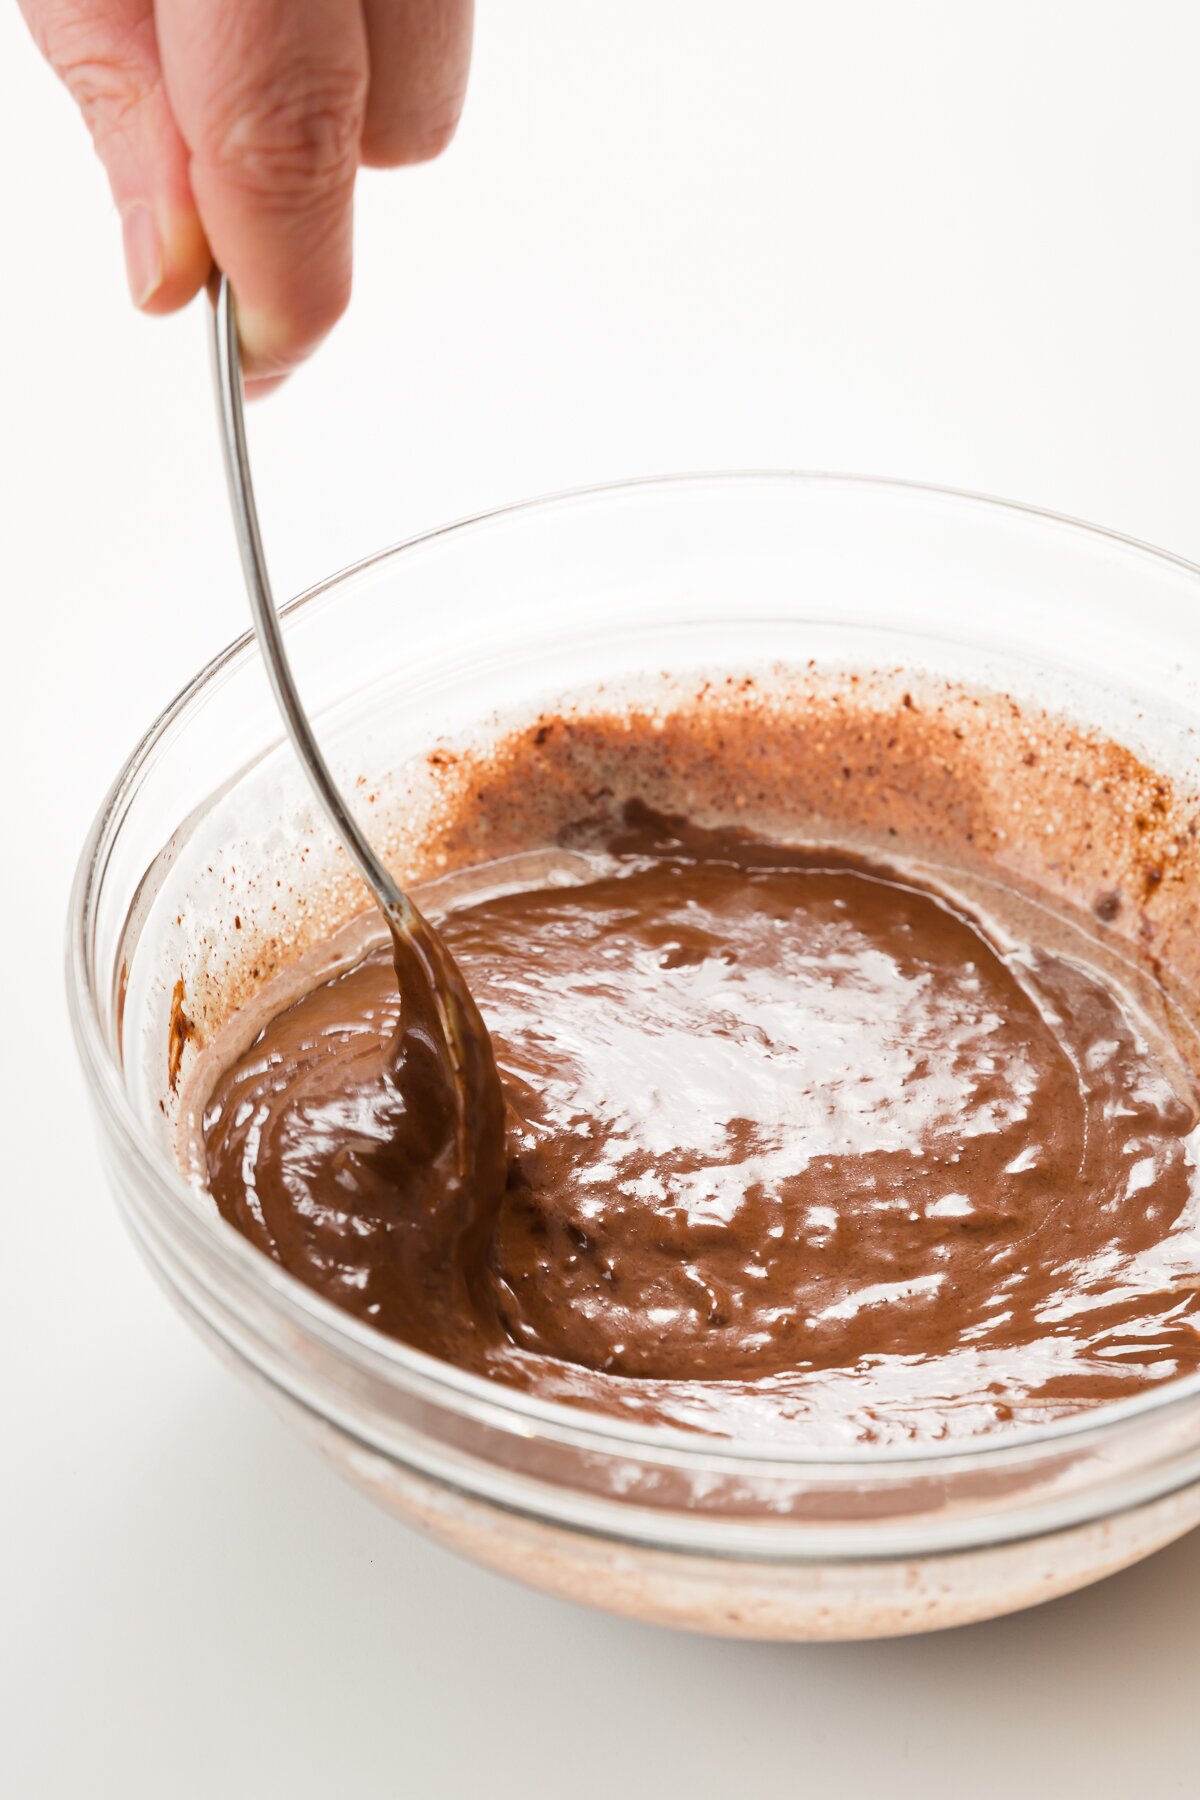 Stirring a bowl of chocolate mixed with cream